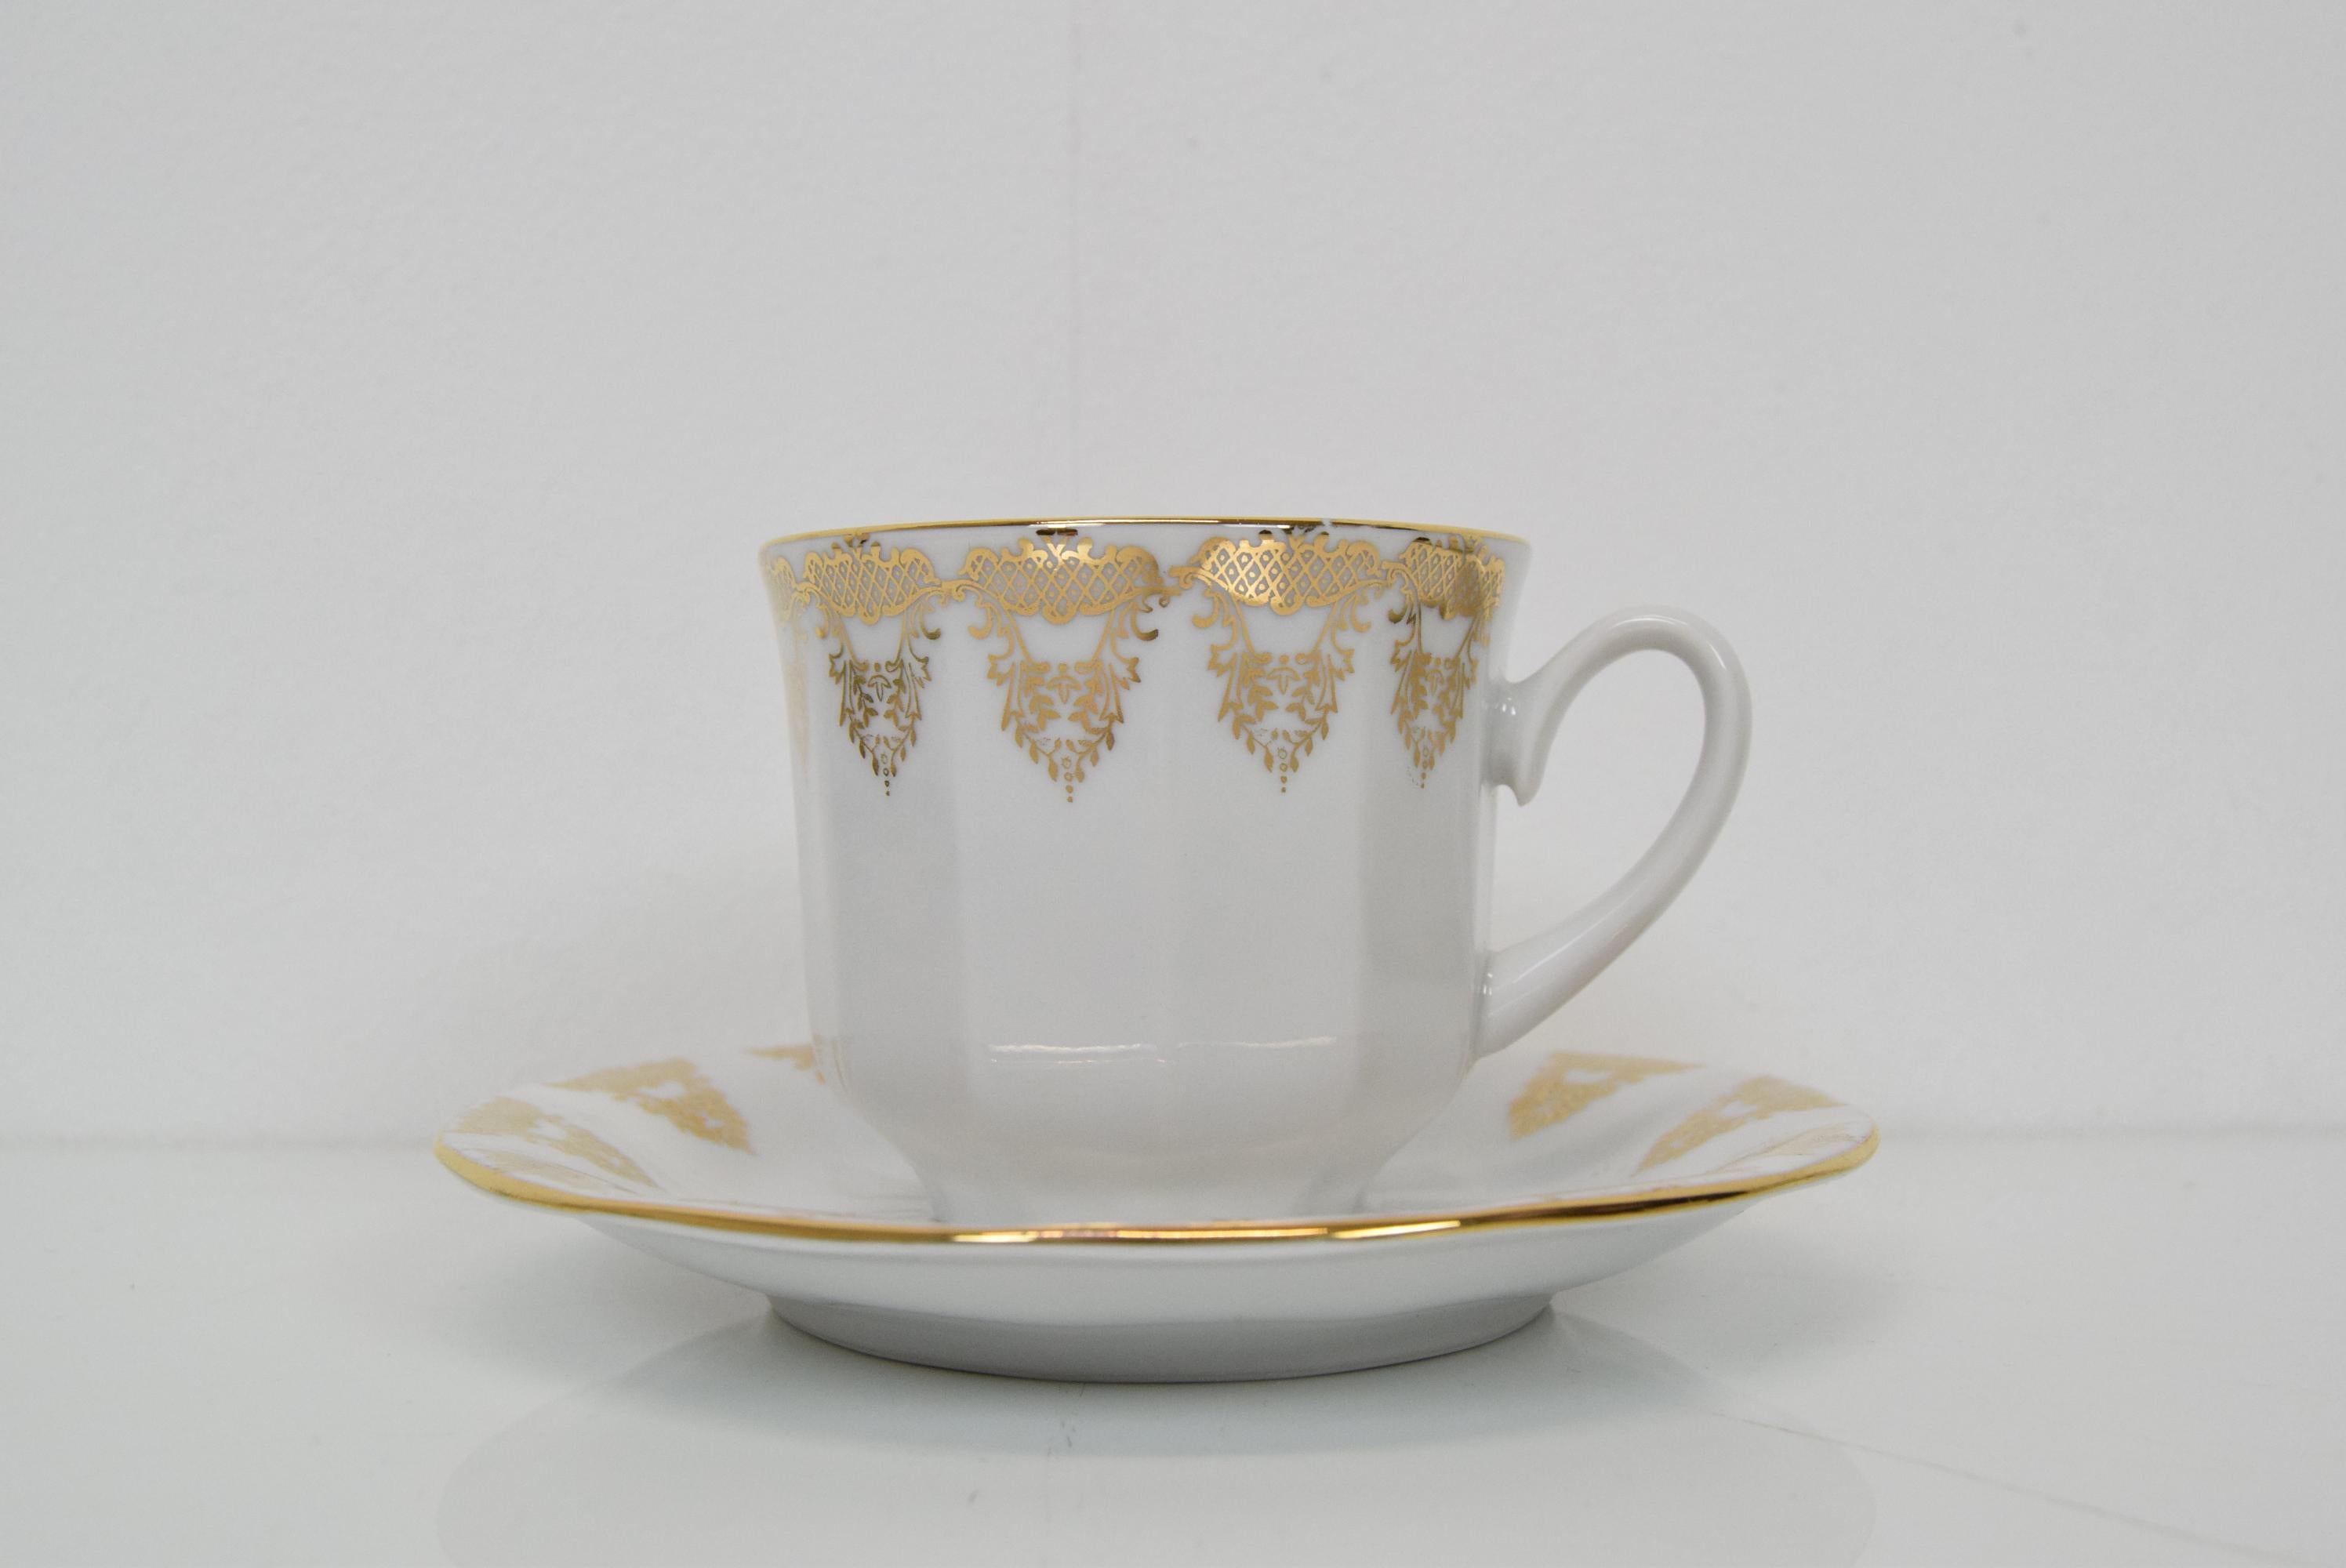 Set Porcelain for Tea or Coffee, Carlsbad Porcealin by Company Epiag D.F For Sale 11